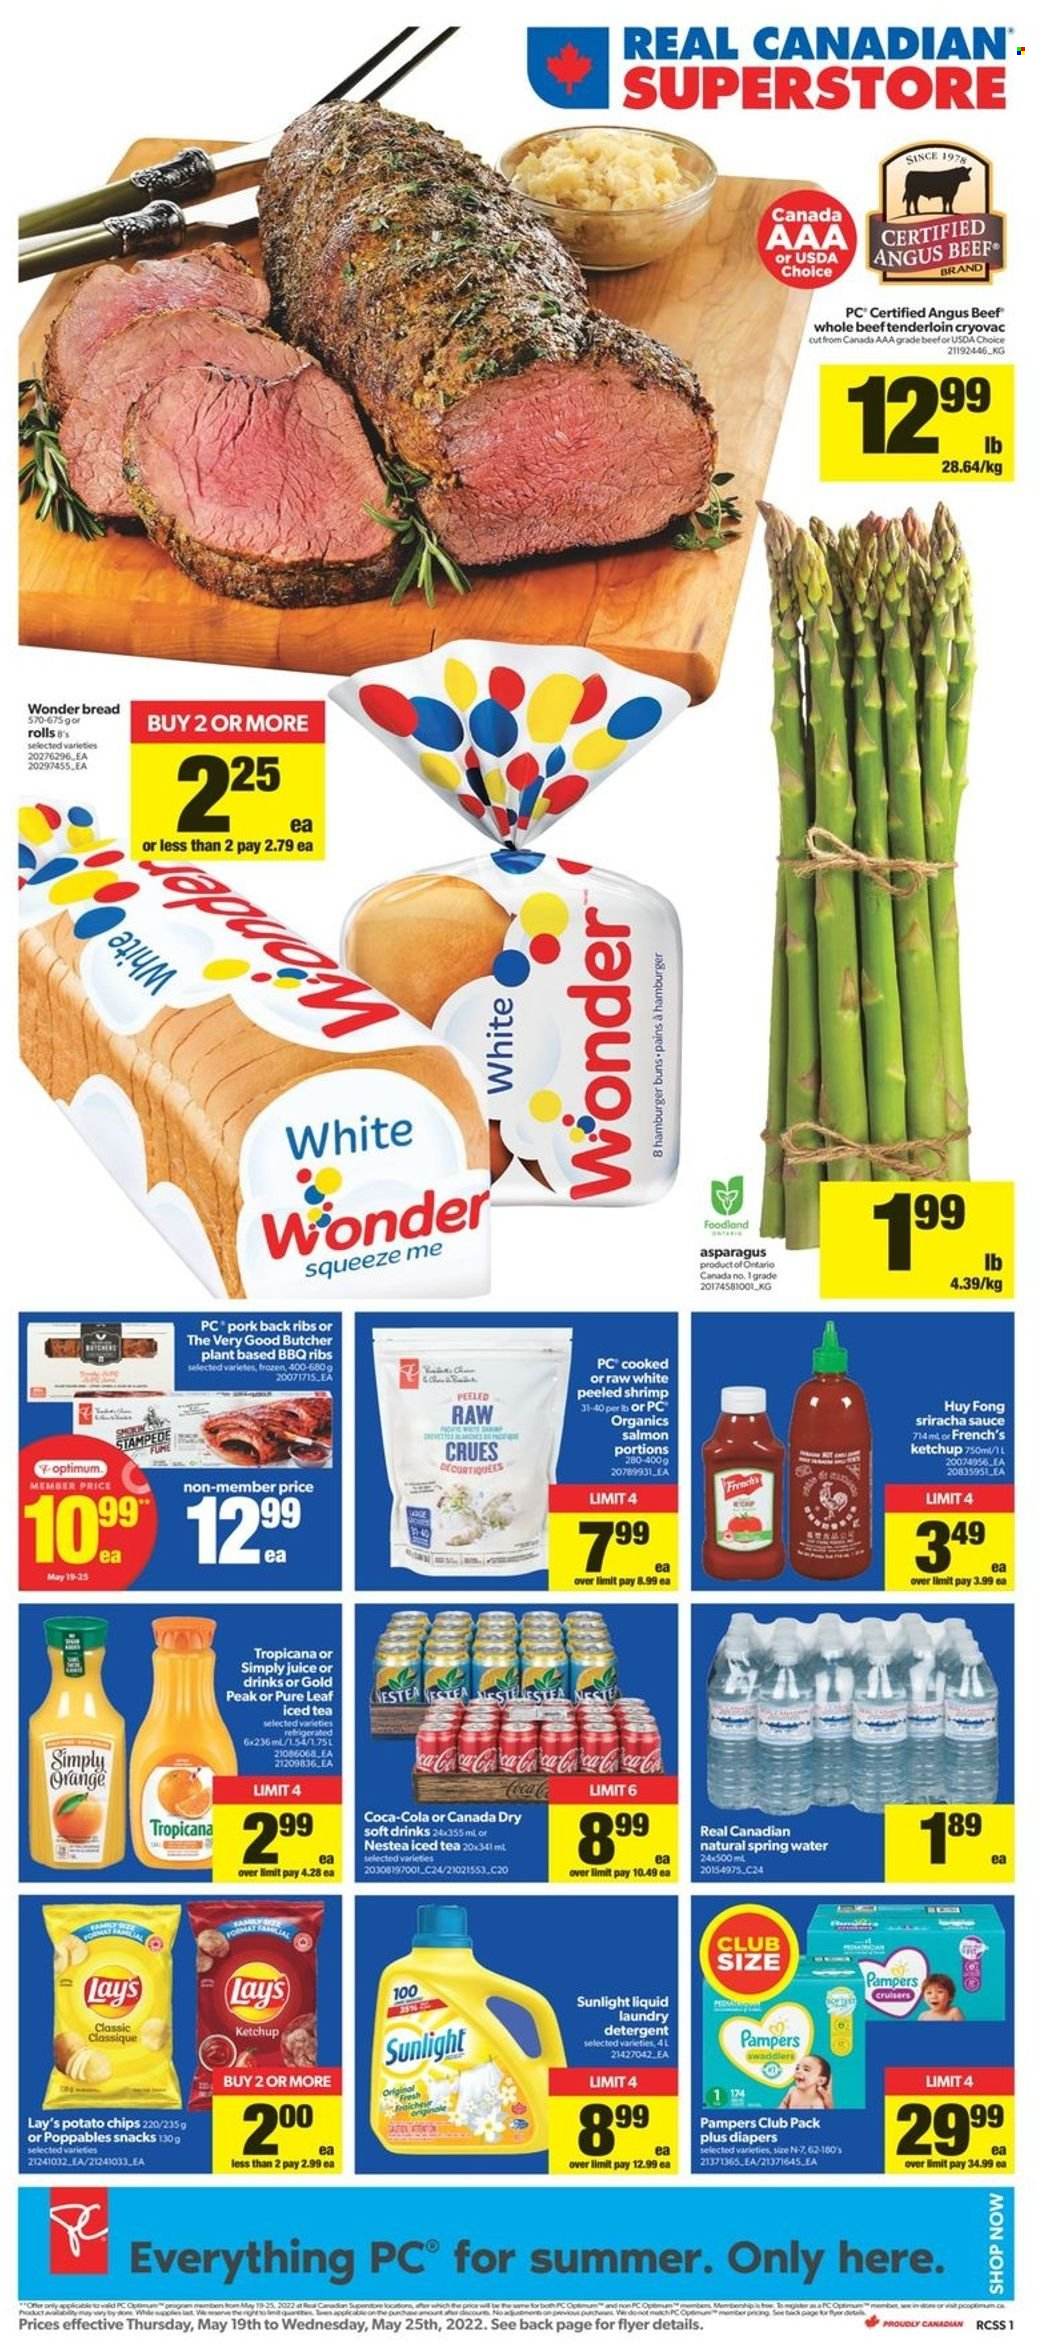 thumbnail - Circulaire Real Canadian Superstore - 19 Mai 2022 - 25 Mai 2022 - Produits soldés - pain hamburger, asperge, chips, Lay’s, Coca-Cola, détergent, Sunlight, Tropicana, Pampers. Page 1.